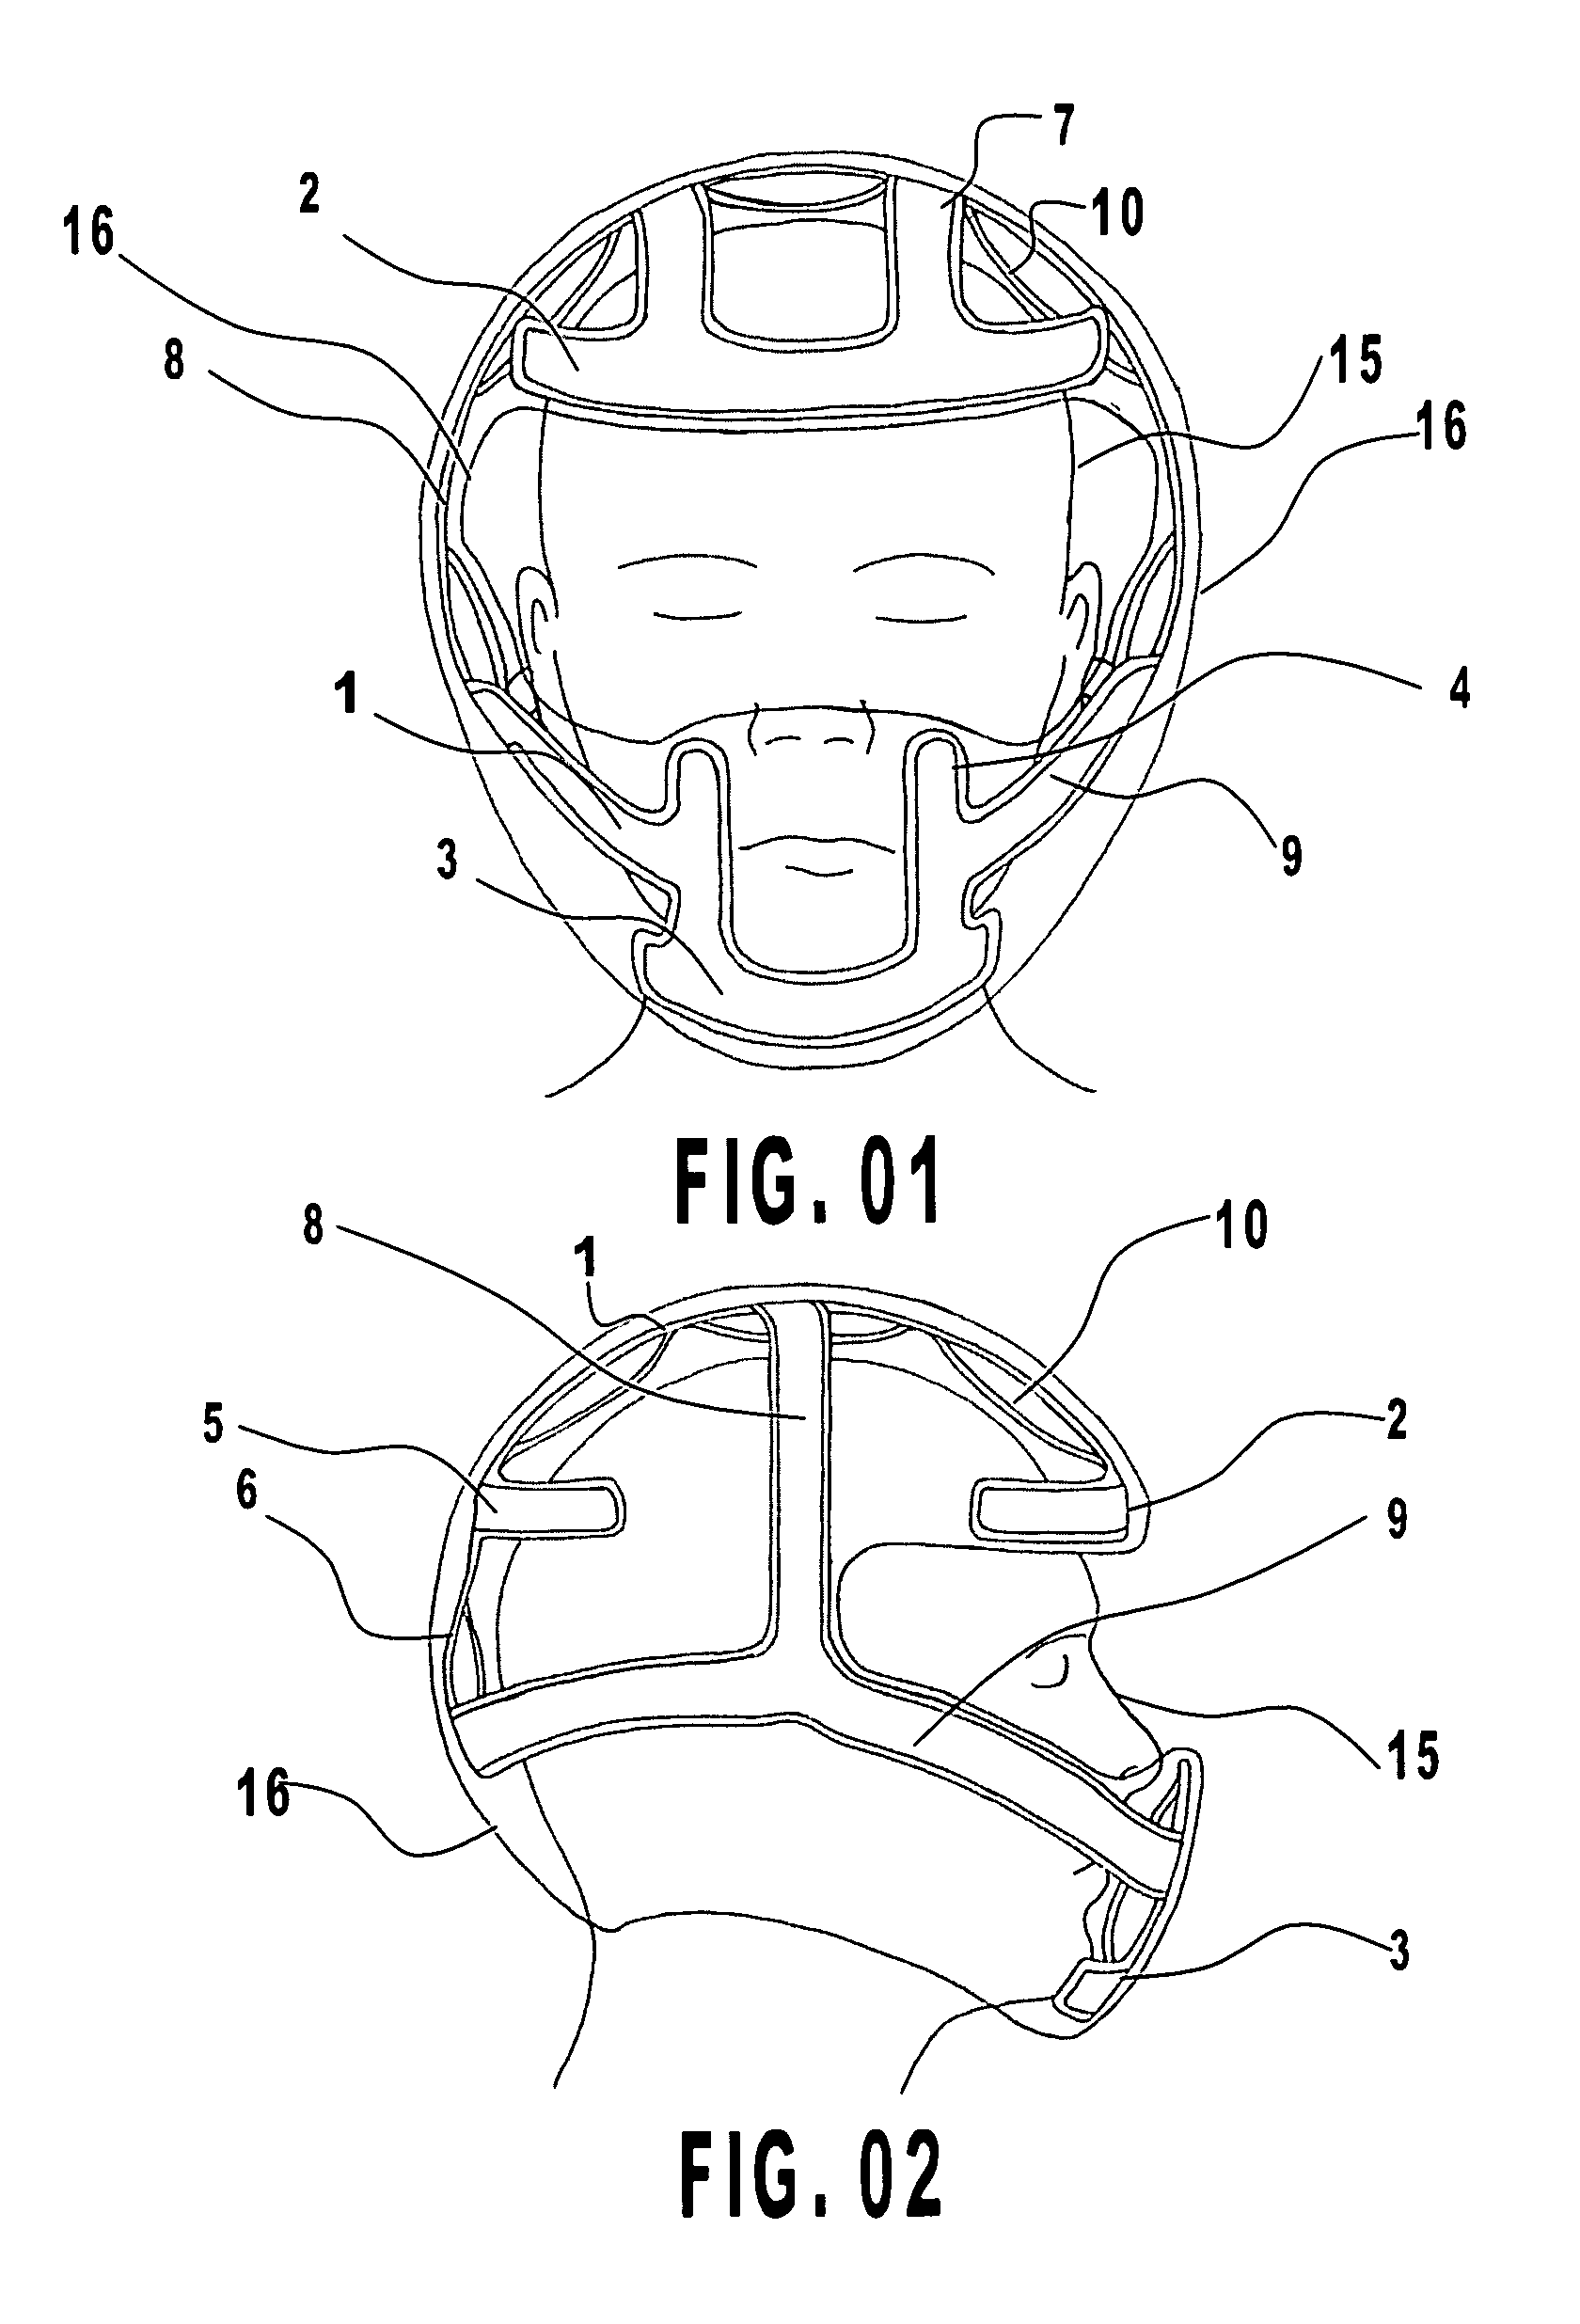 Impact Absorbing Frame and Layered Structure System for Safety Helmets